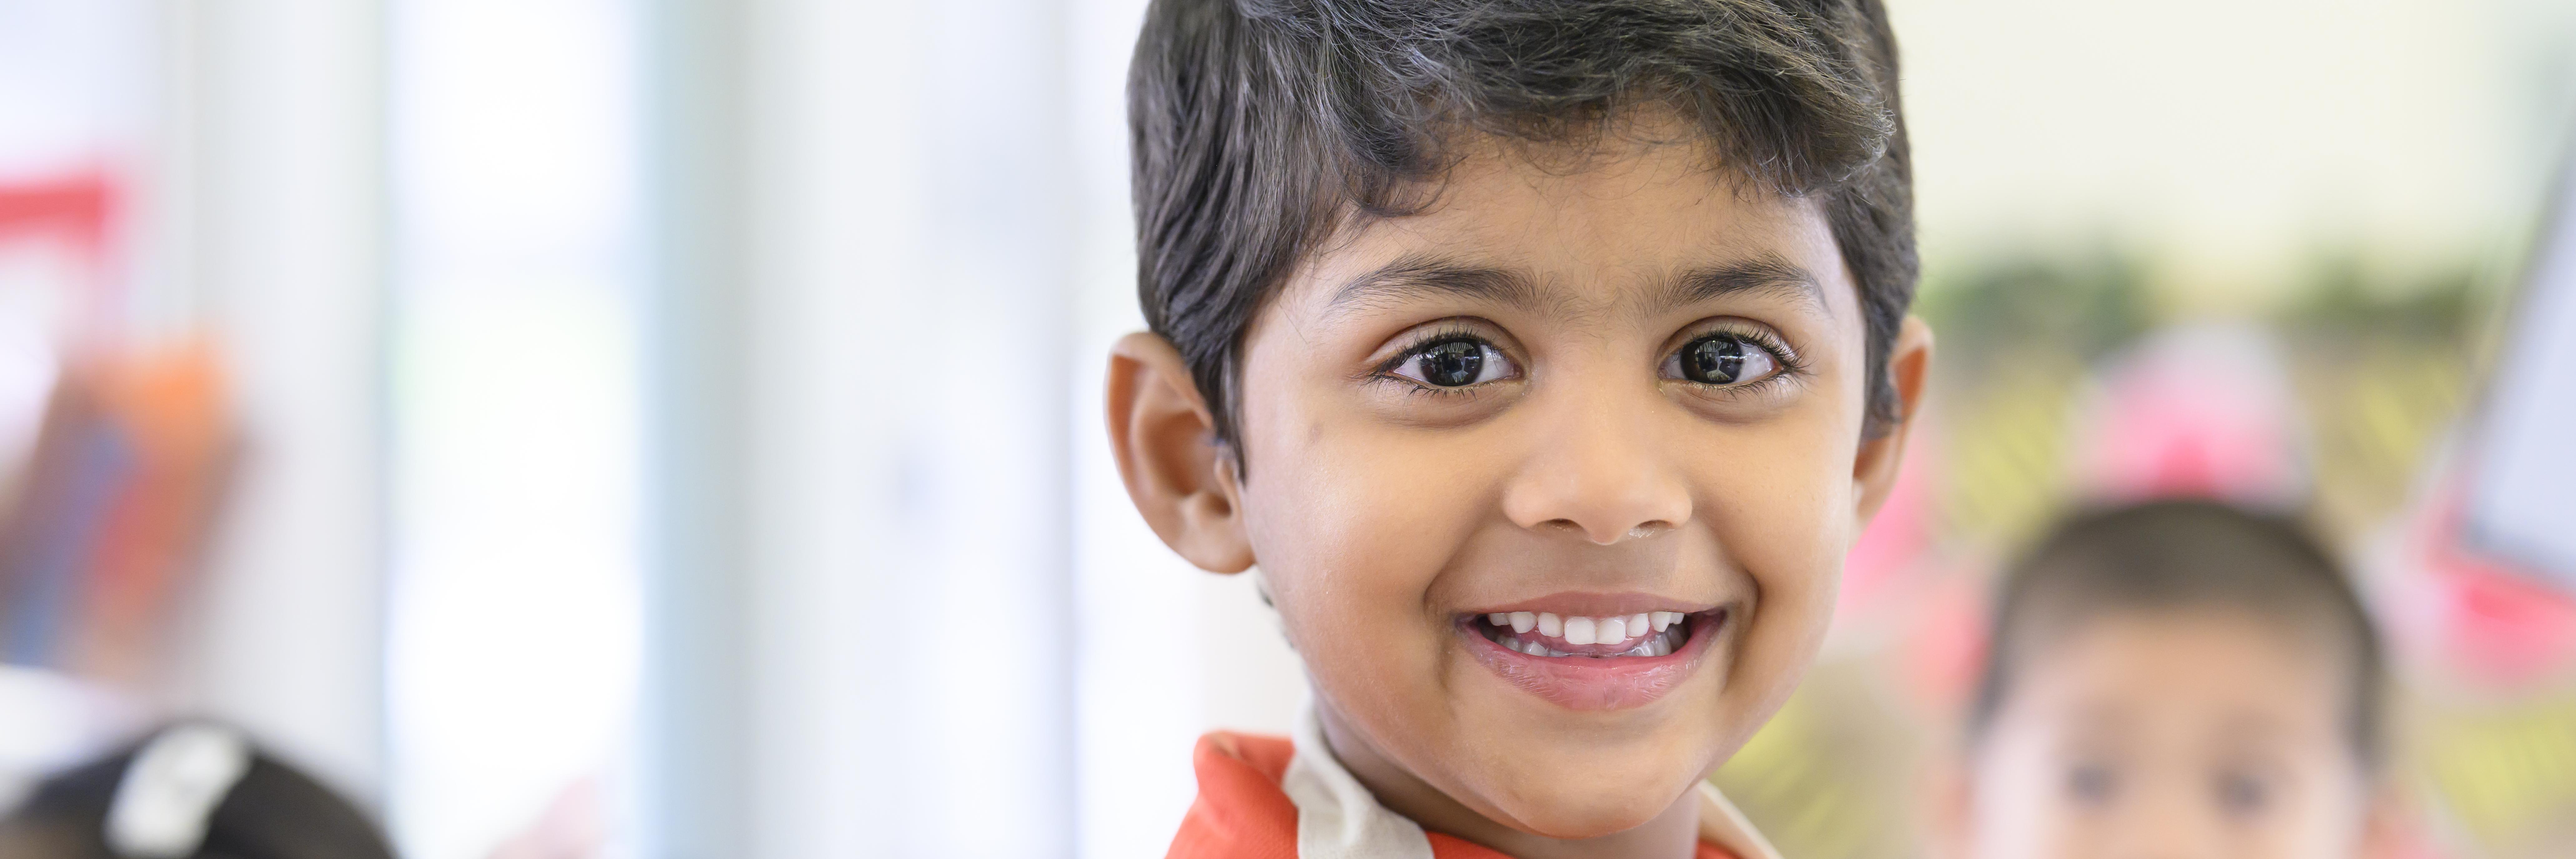 Little boy looking towards the camera with a big grin, close up of his face